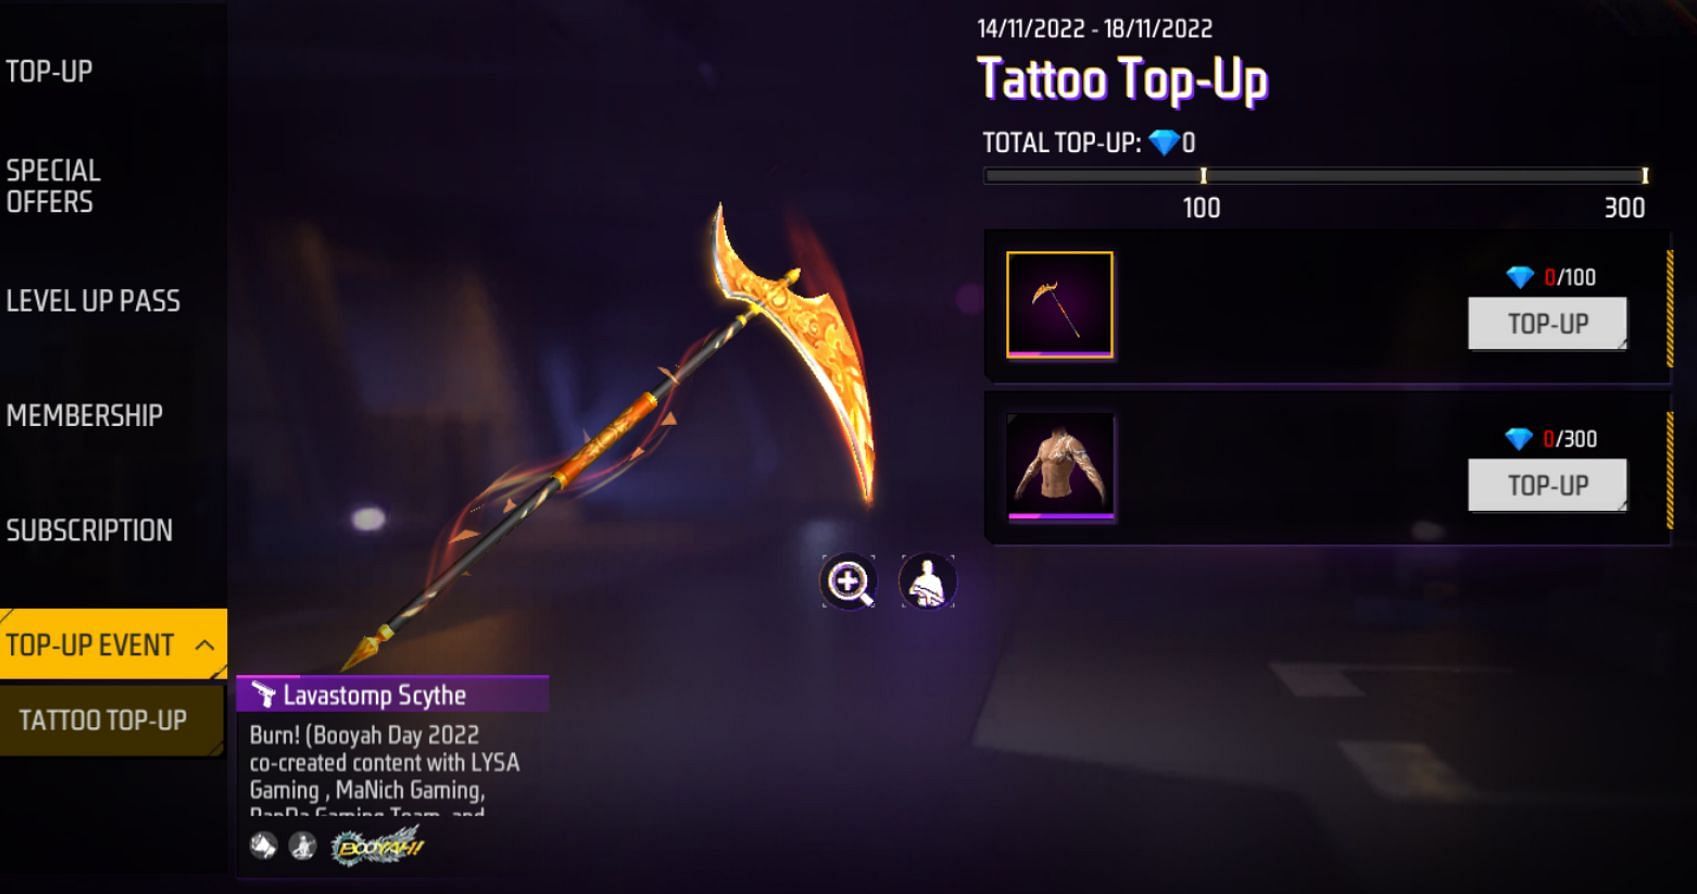 Access the ongoing Tattoo Top-Up via the &quot;Top-Up Event&quot; tab in the diamond section (Image via Garena)